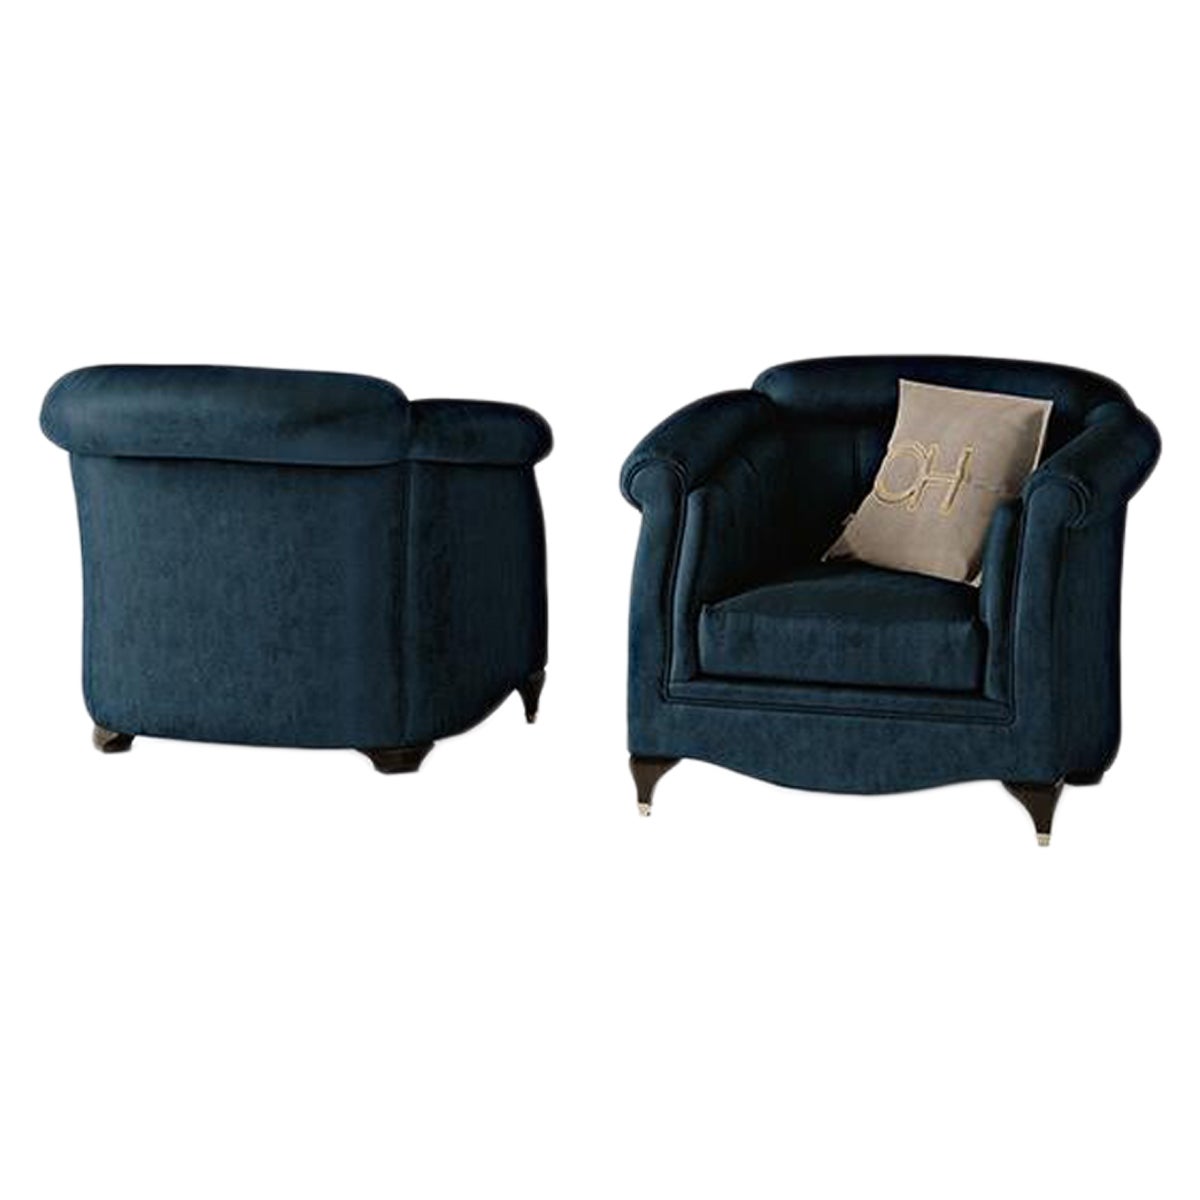 21st Century Carpanese Home Italia Armchair with Wooden Legs Neoclassic, 6637 For Sale